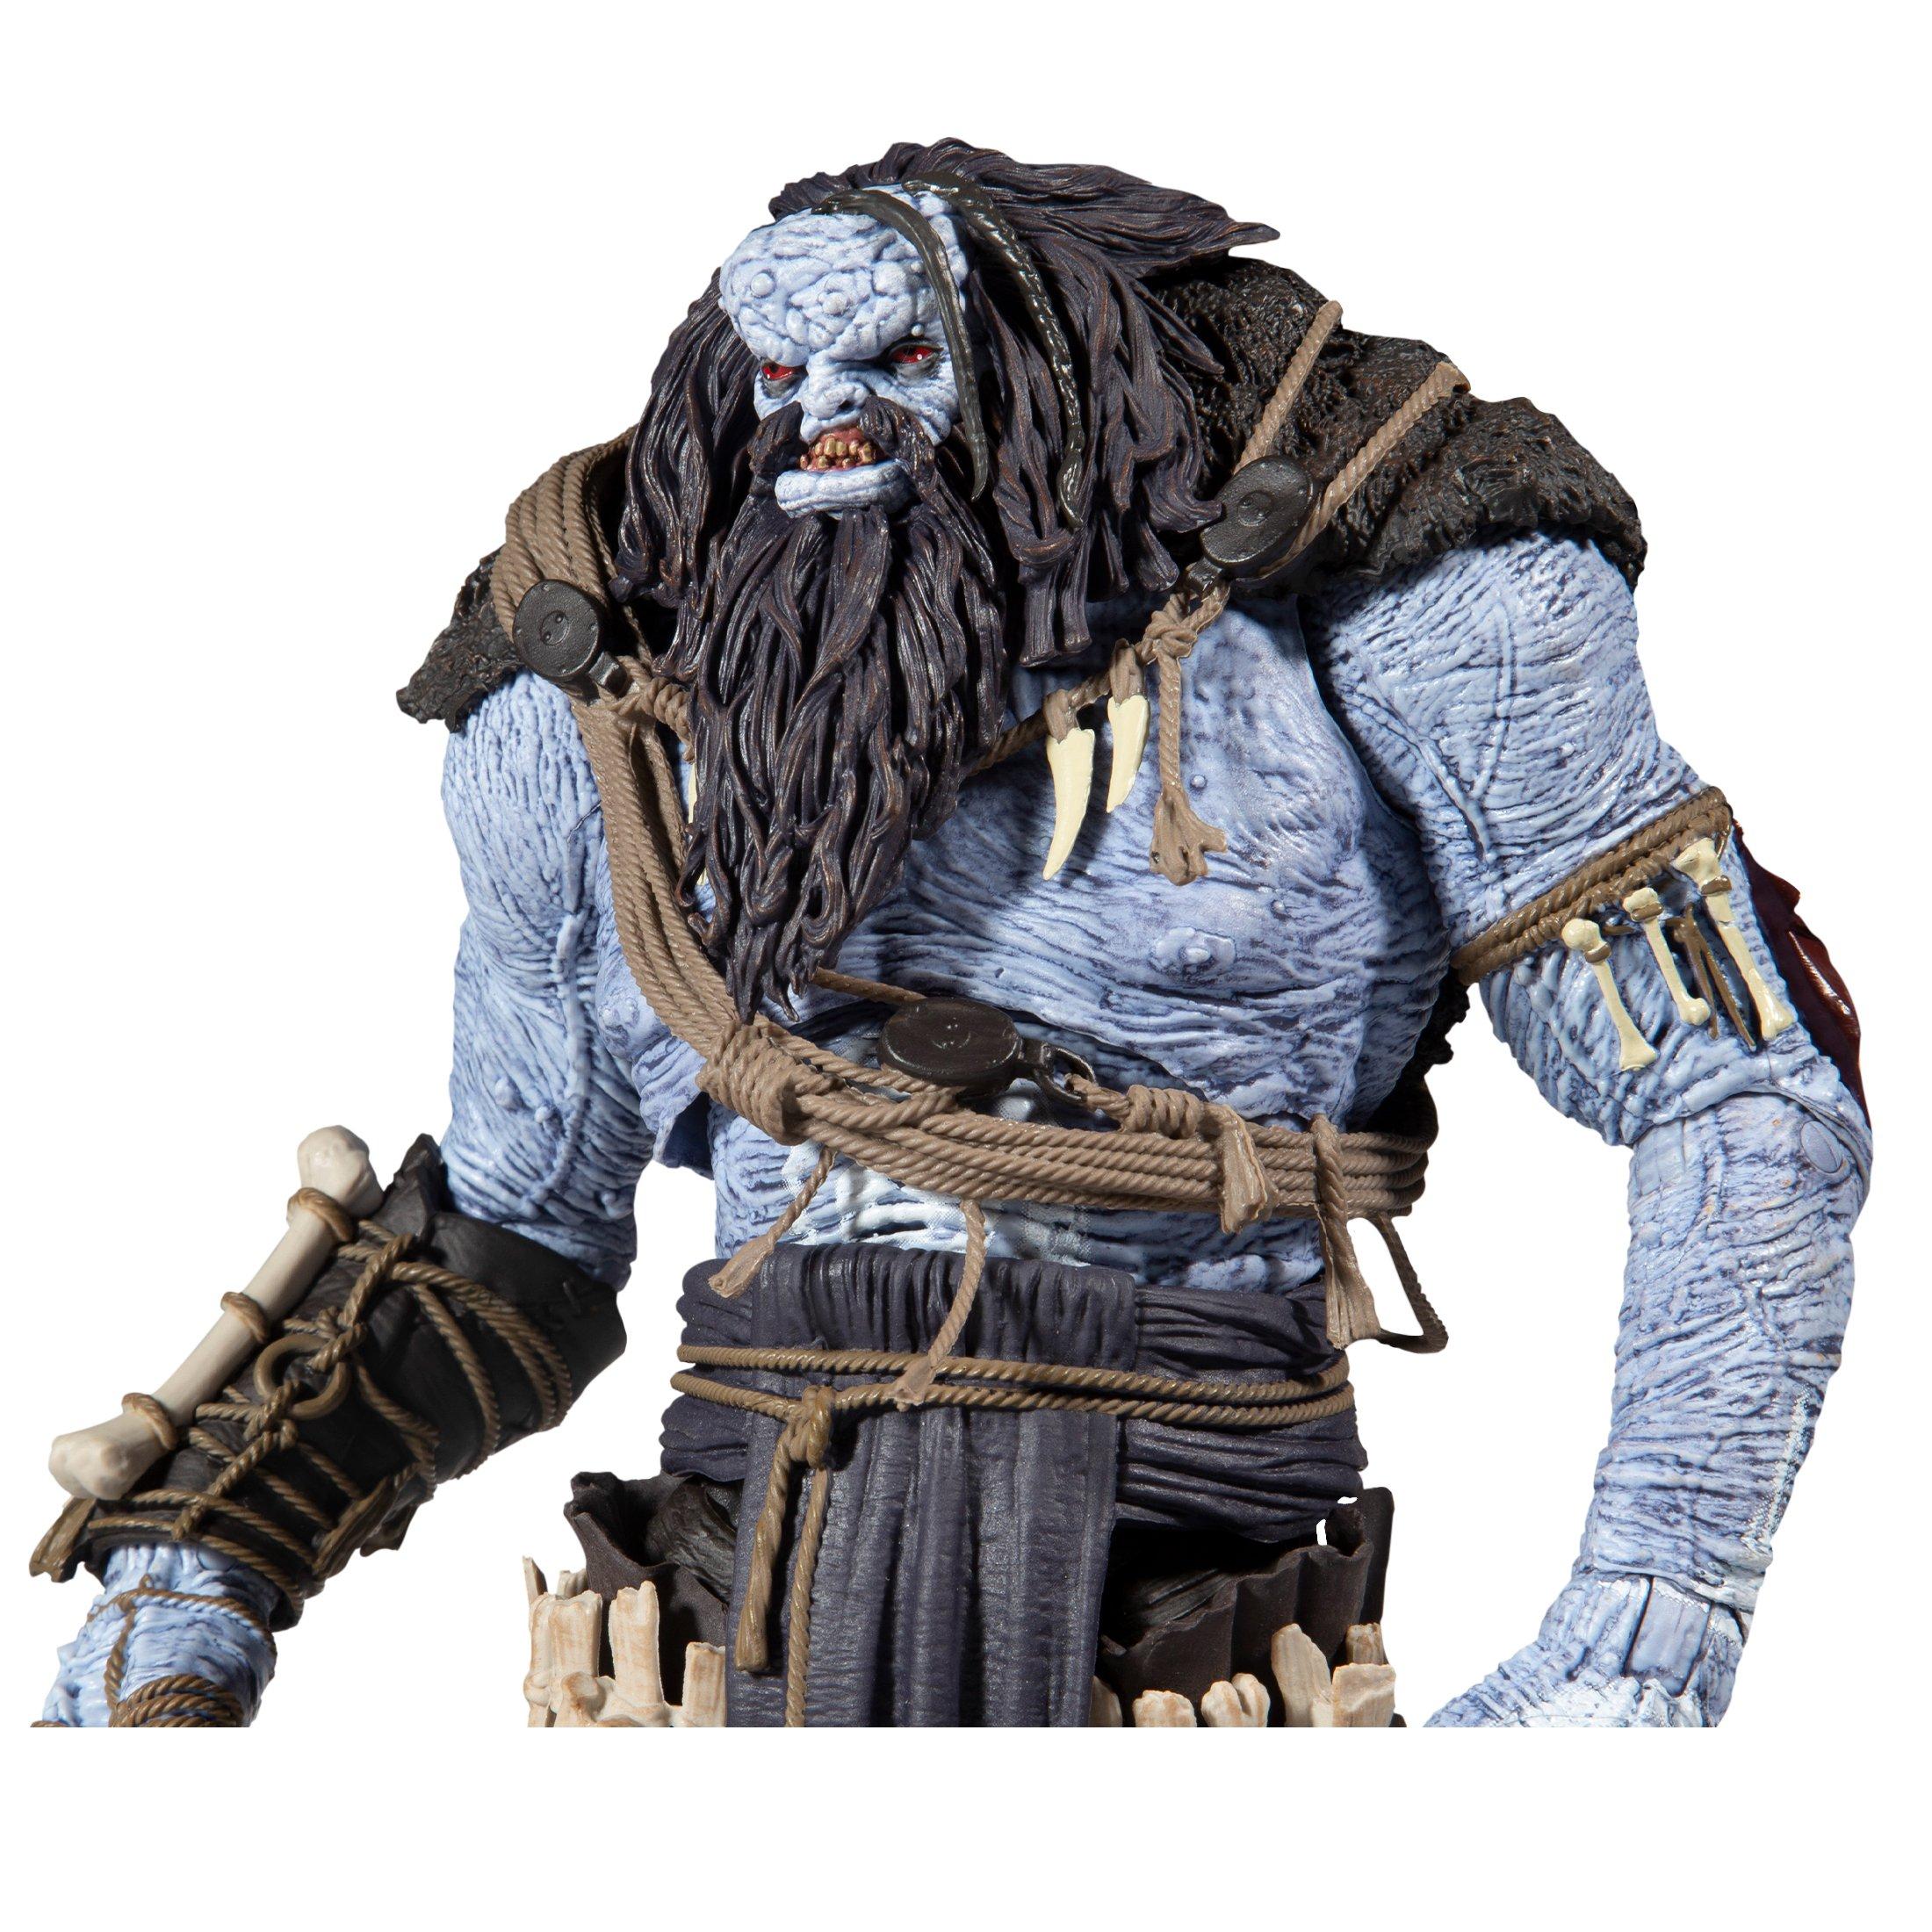 list item 5 of 10 McFarlane Toys The Witcher 3 Ice Giant Megafig Statue 12-in Action Figure